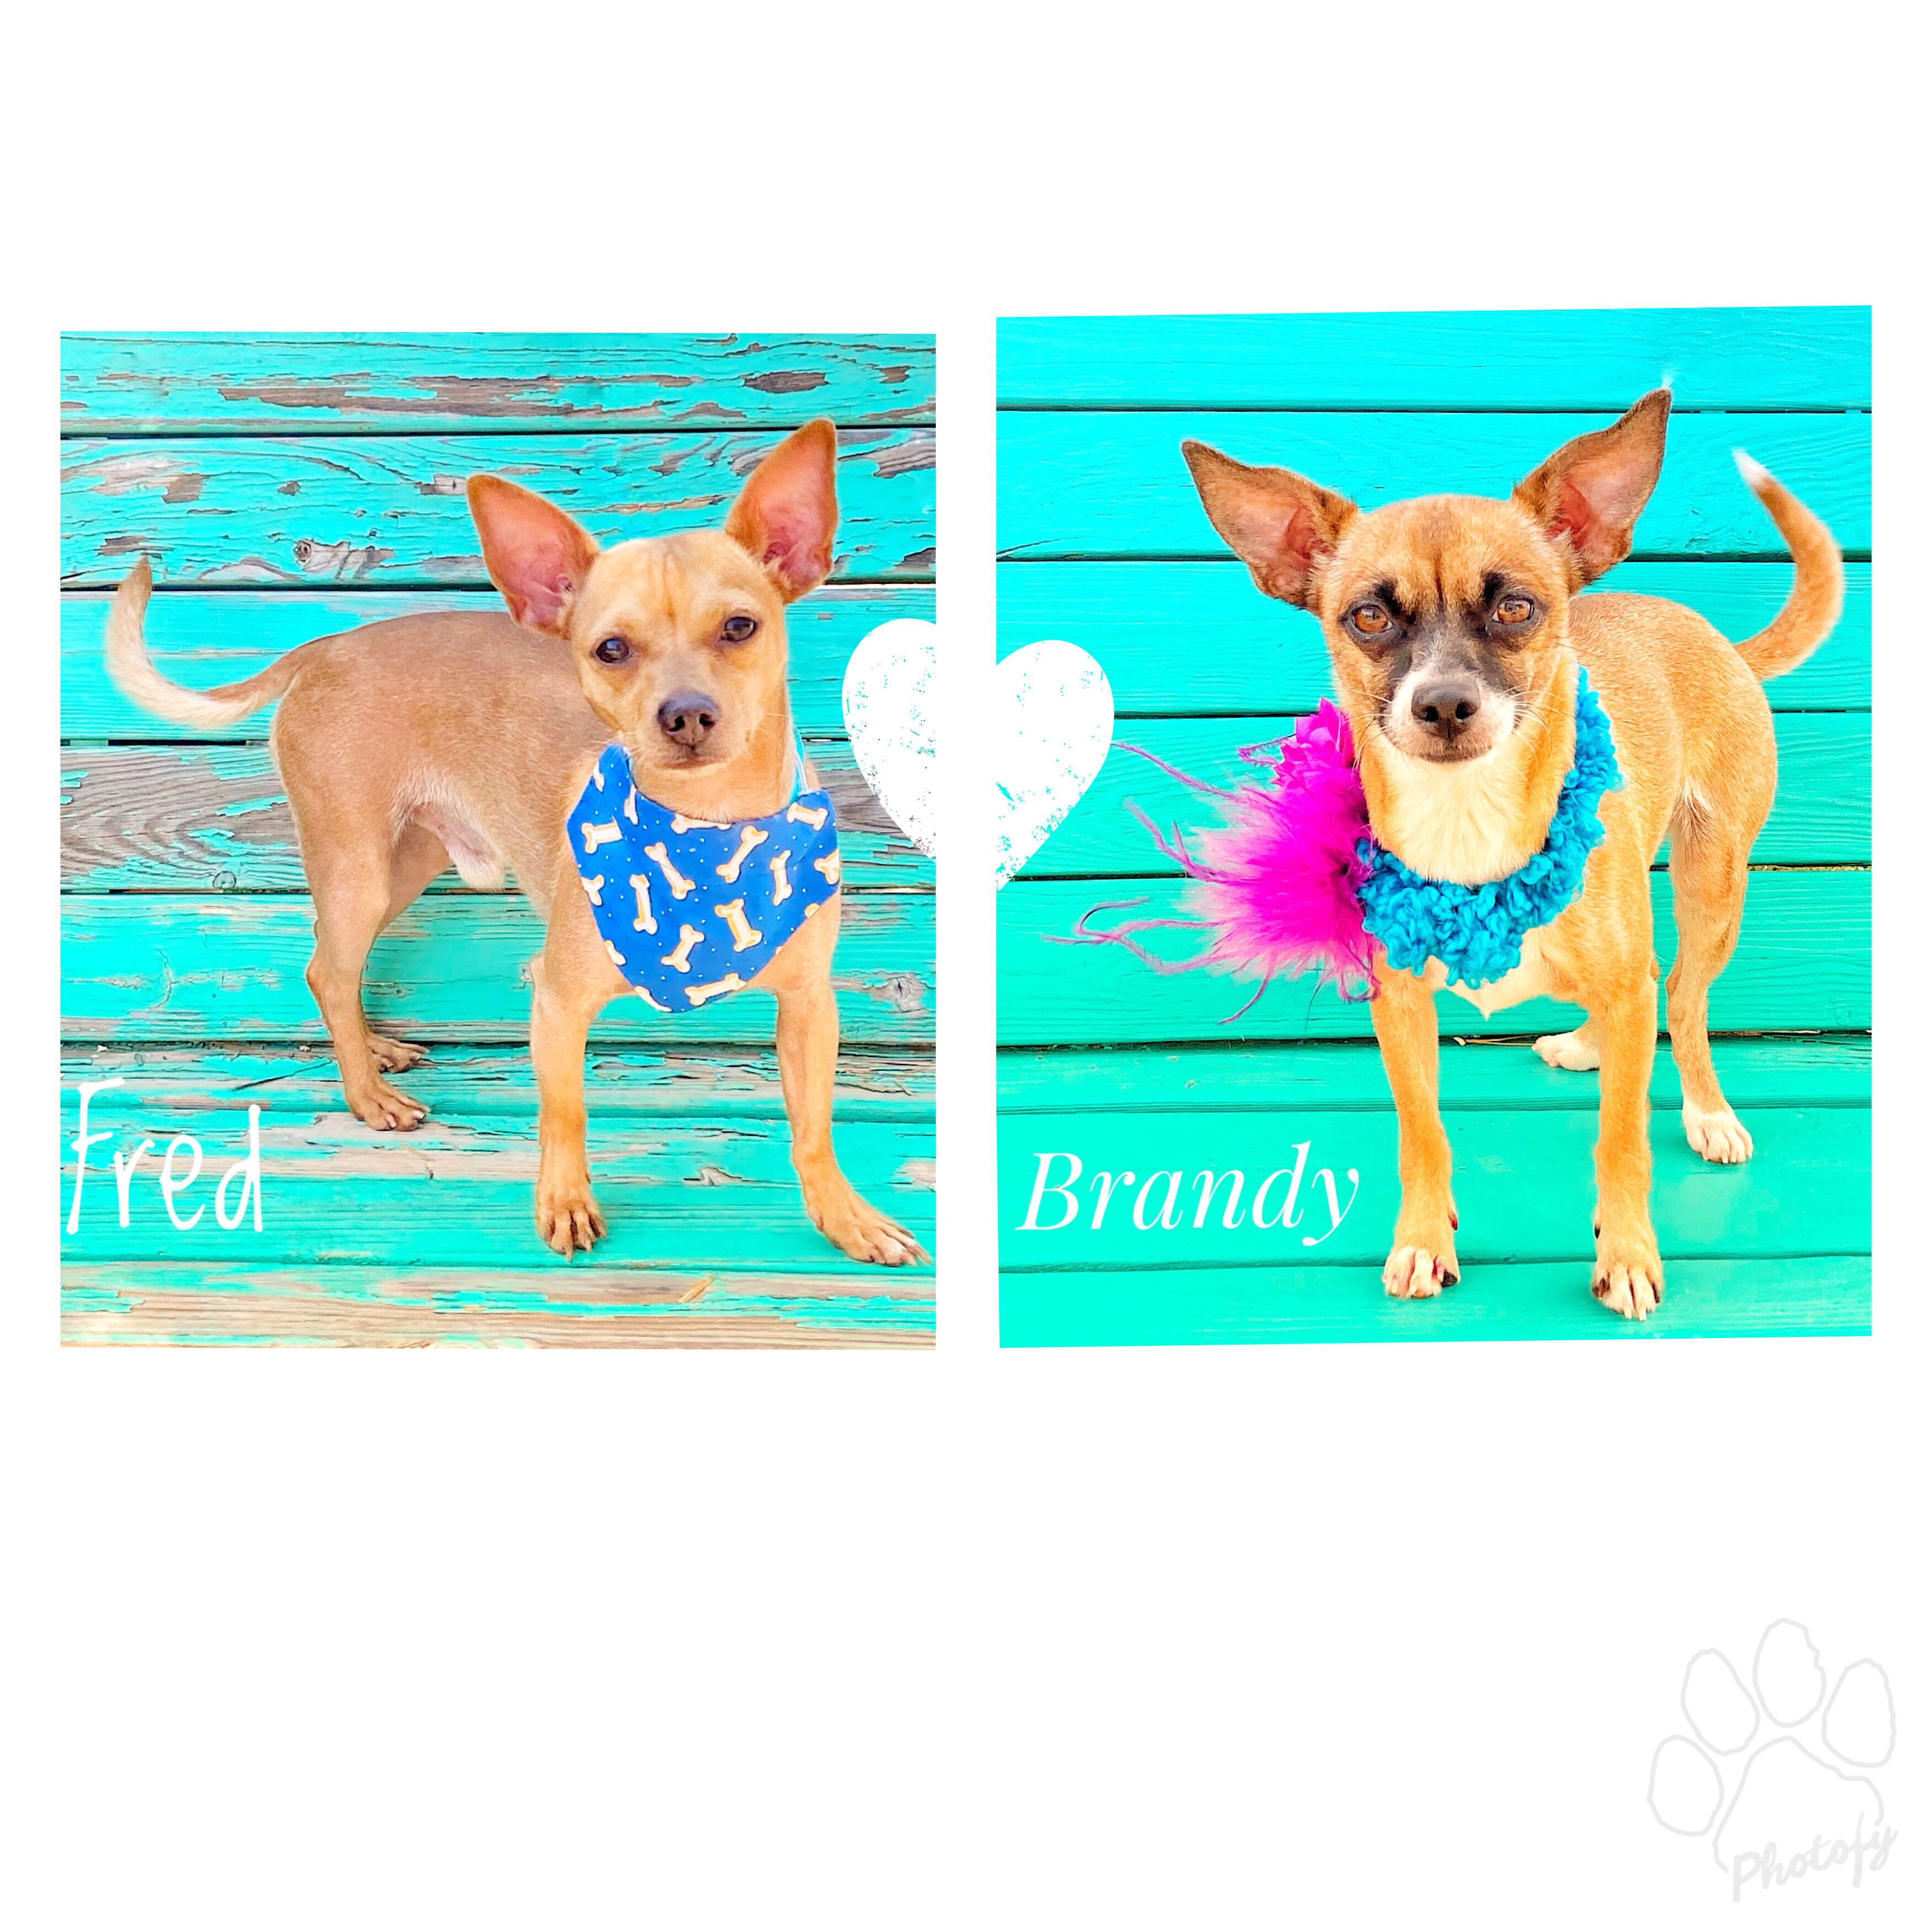 Fred & Brandy , an adoptable Chihuahua in Lubbock, TX, 79407 | Photo Image 1